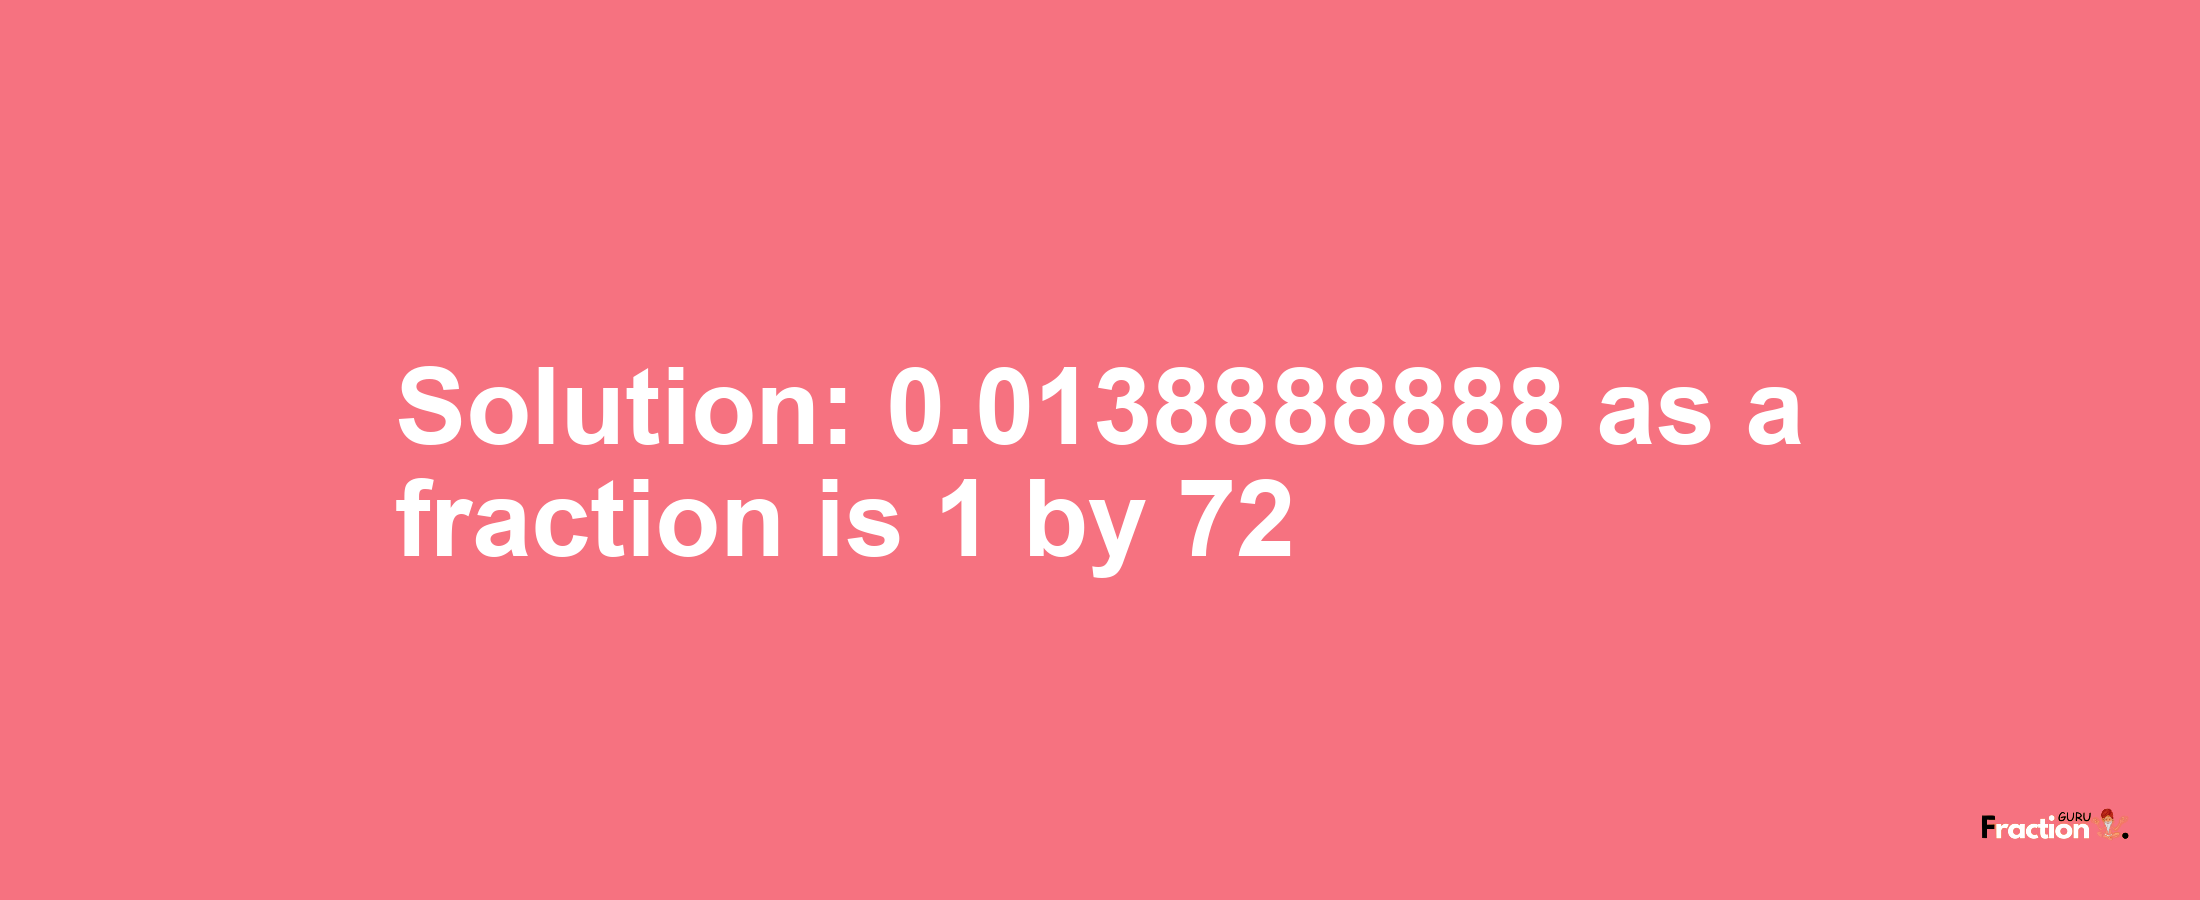 Solution:0.0138888888 as a fraction is 1/72